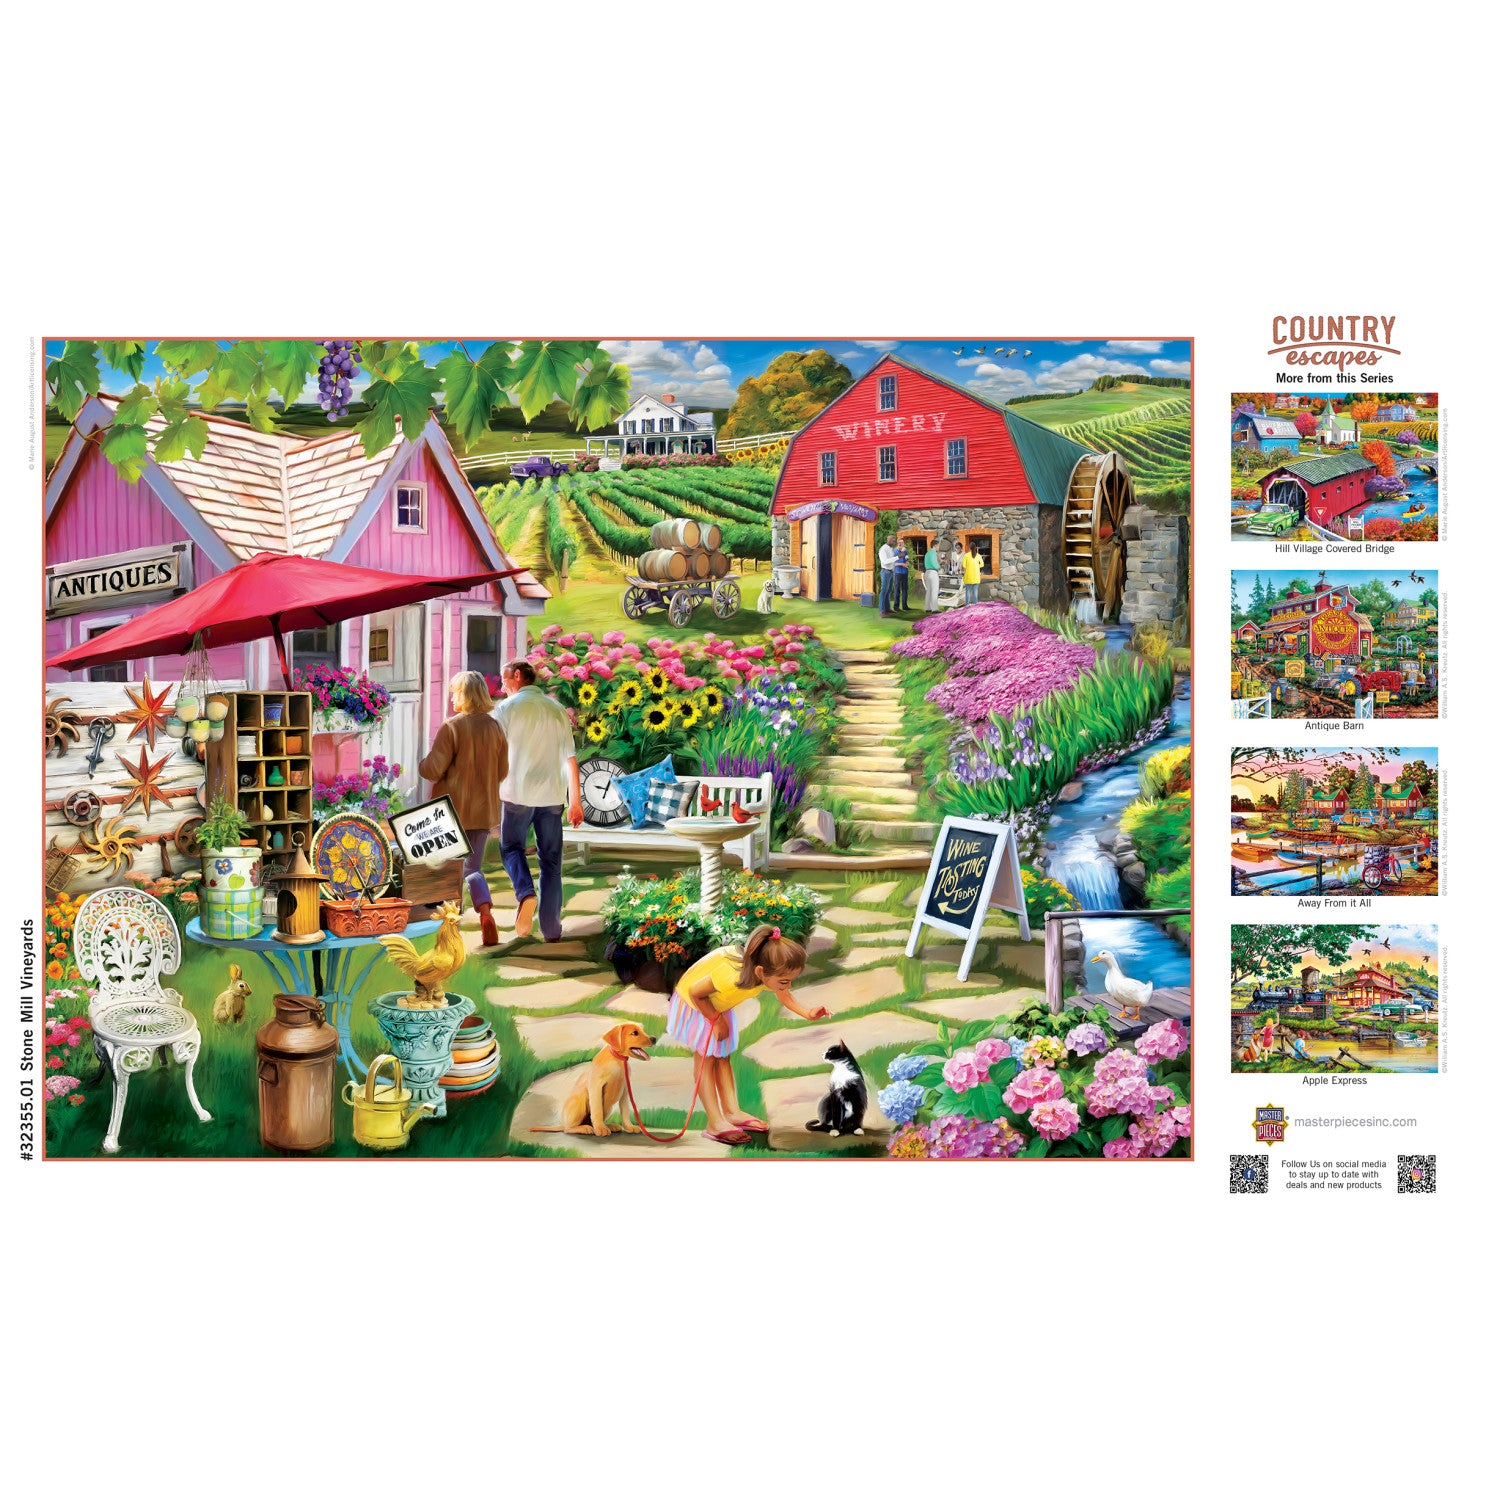 Country Escapes - Stone Mill Vineyards 500 Piece Jigsaw Puzzle